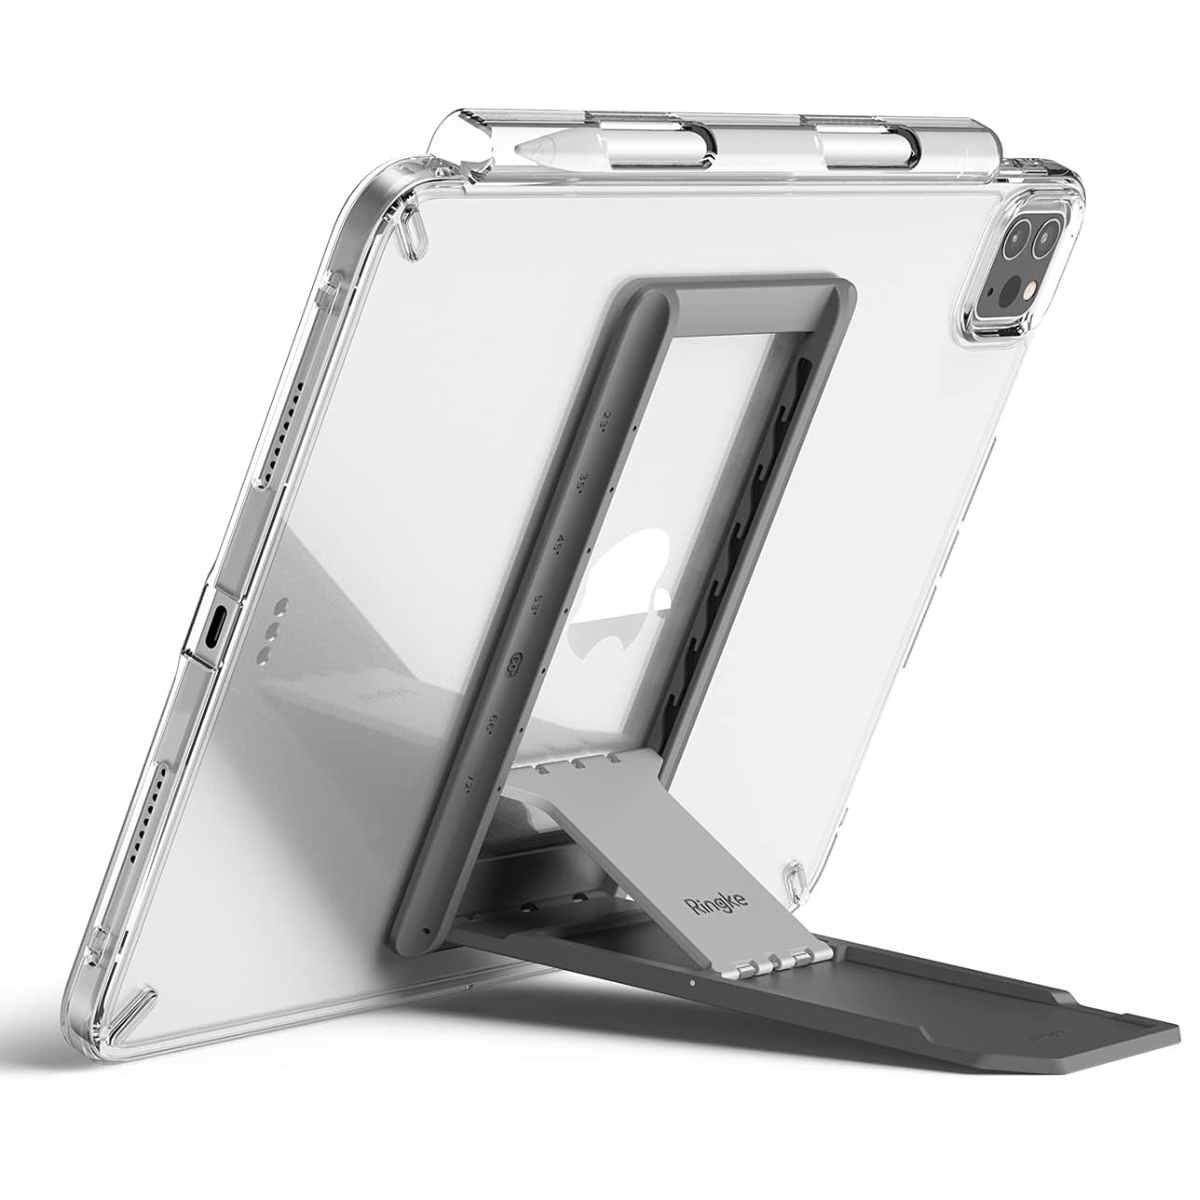 The Ringke Universal Tablet Stand.